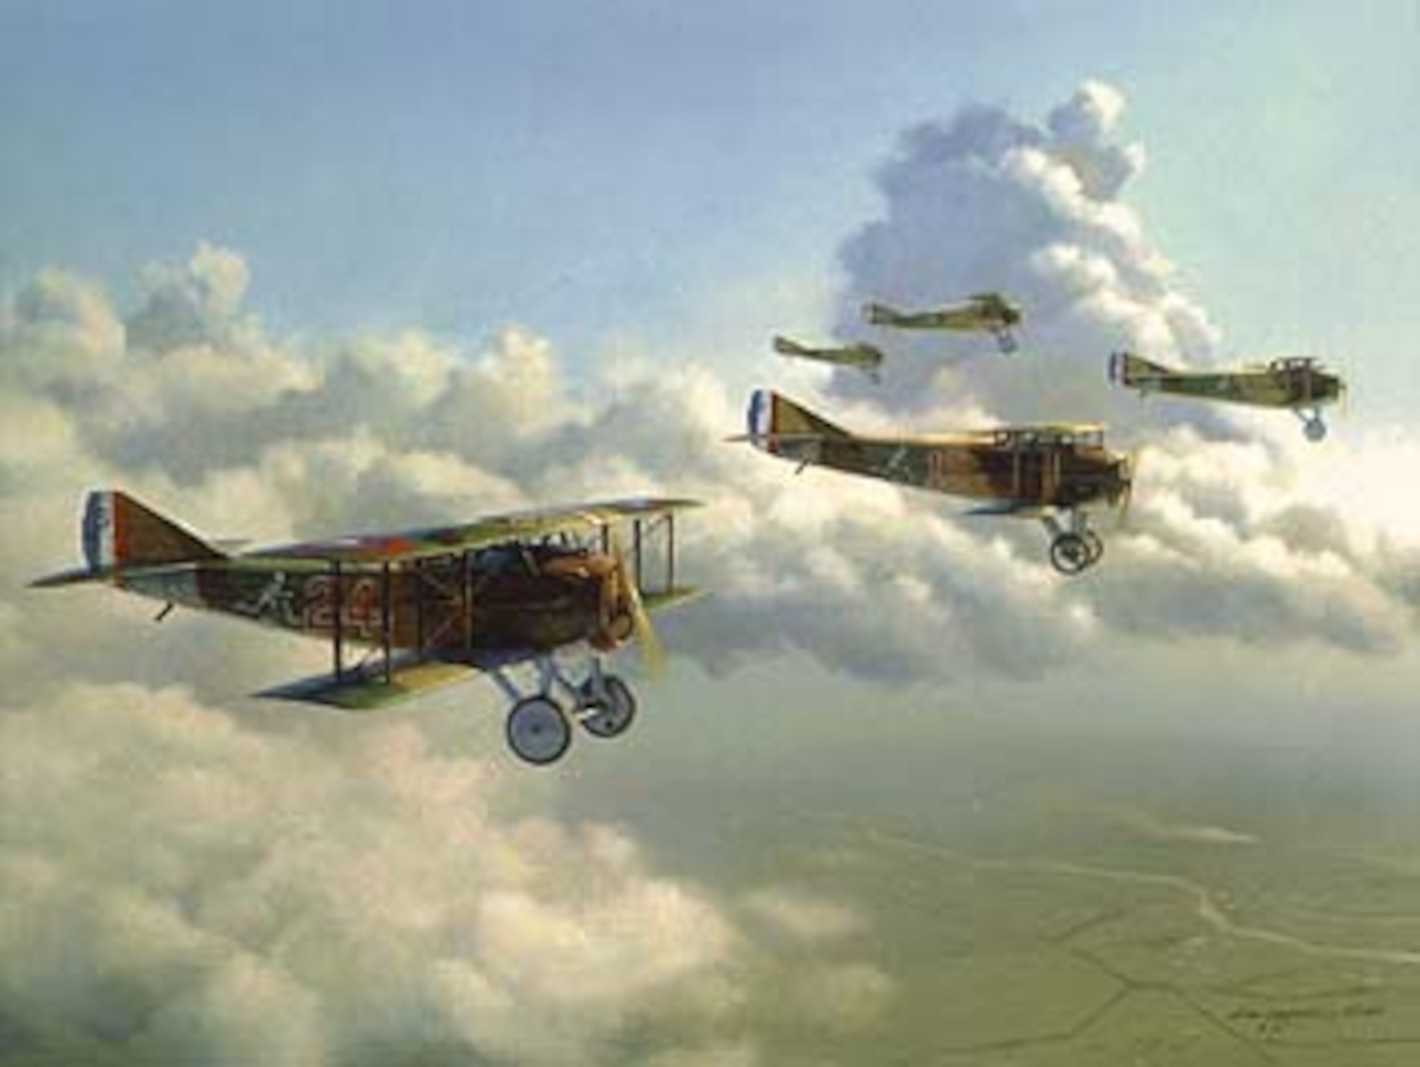 Air Force Art  "Flight of Aces"  showing SPAD fighters in World War I by James Laurier
